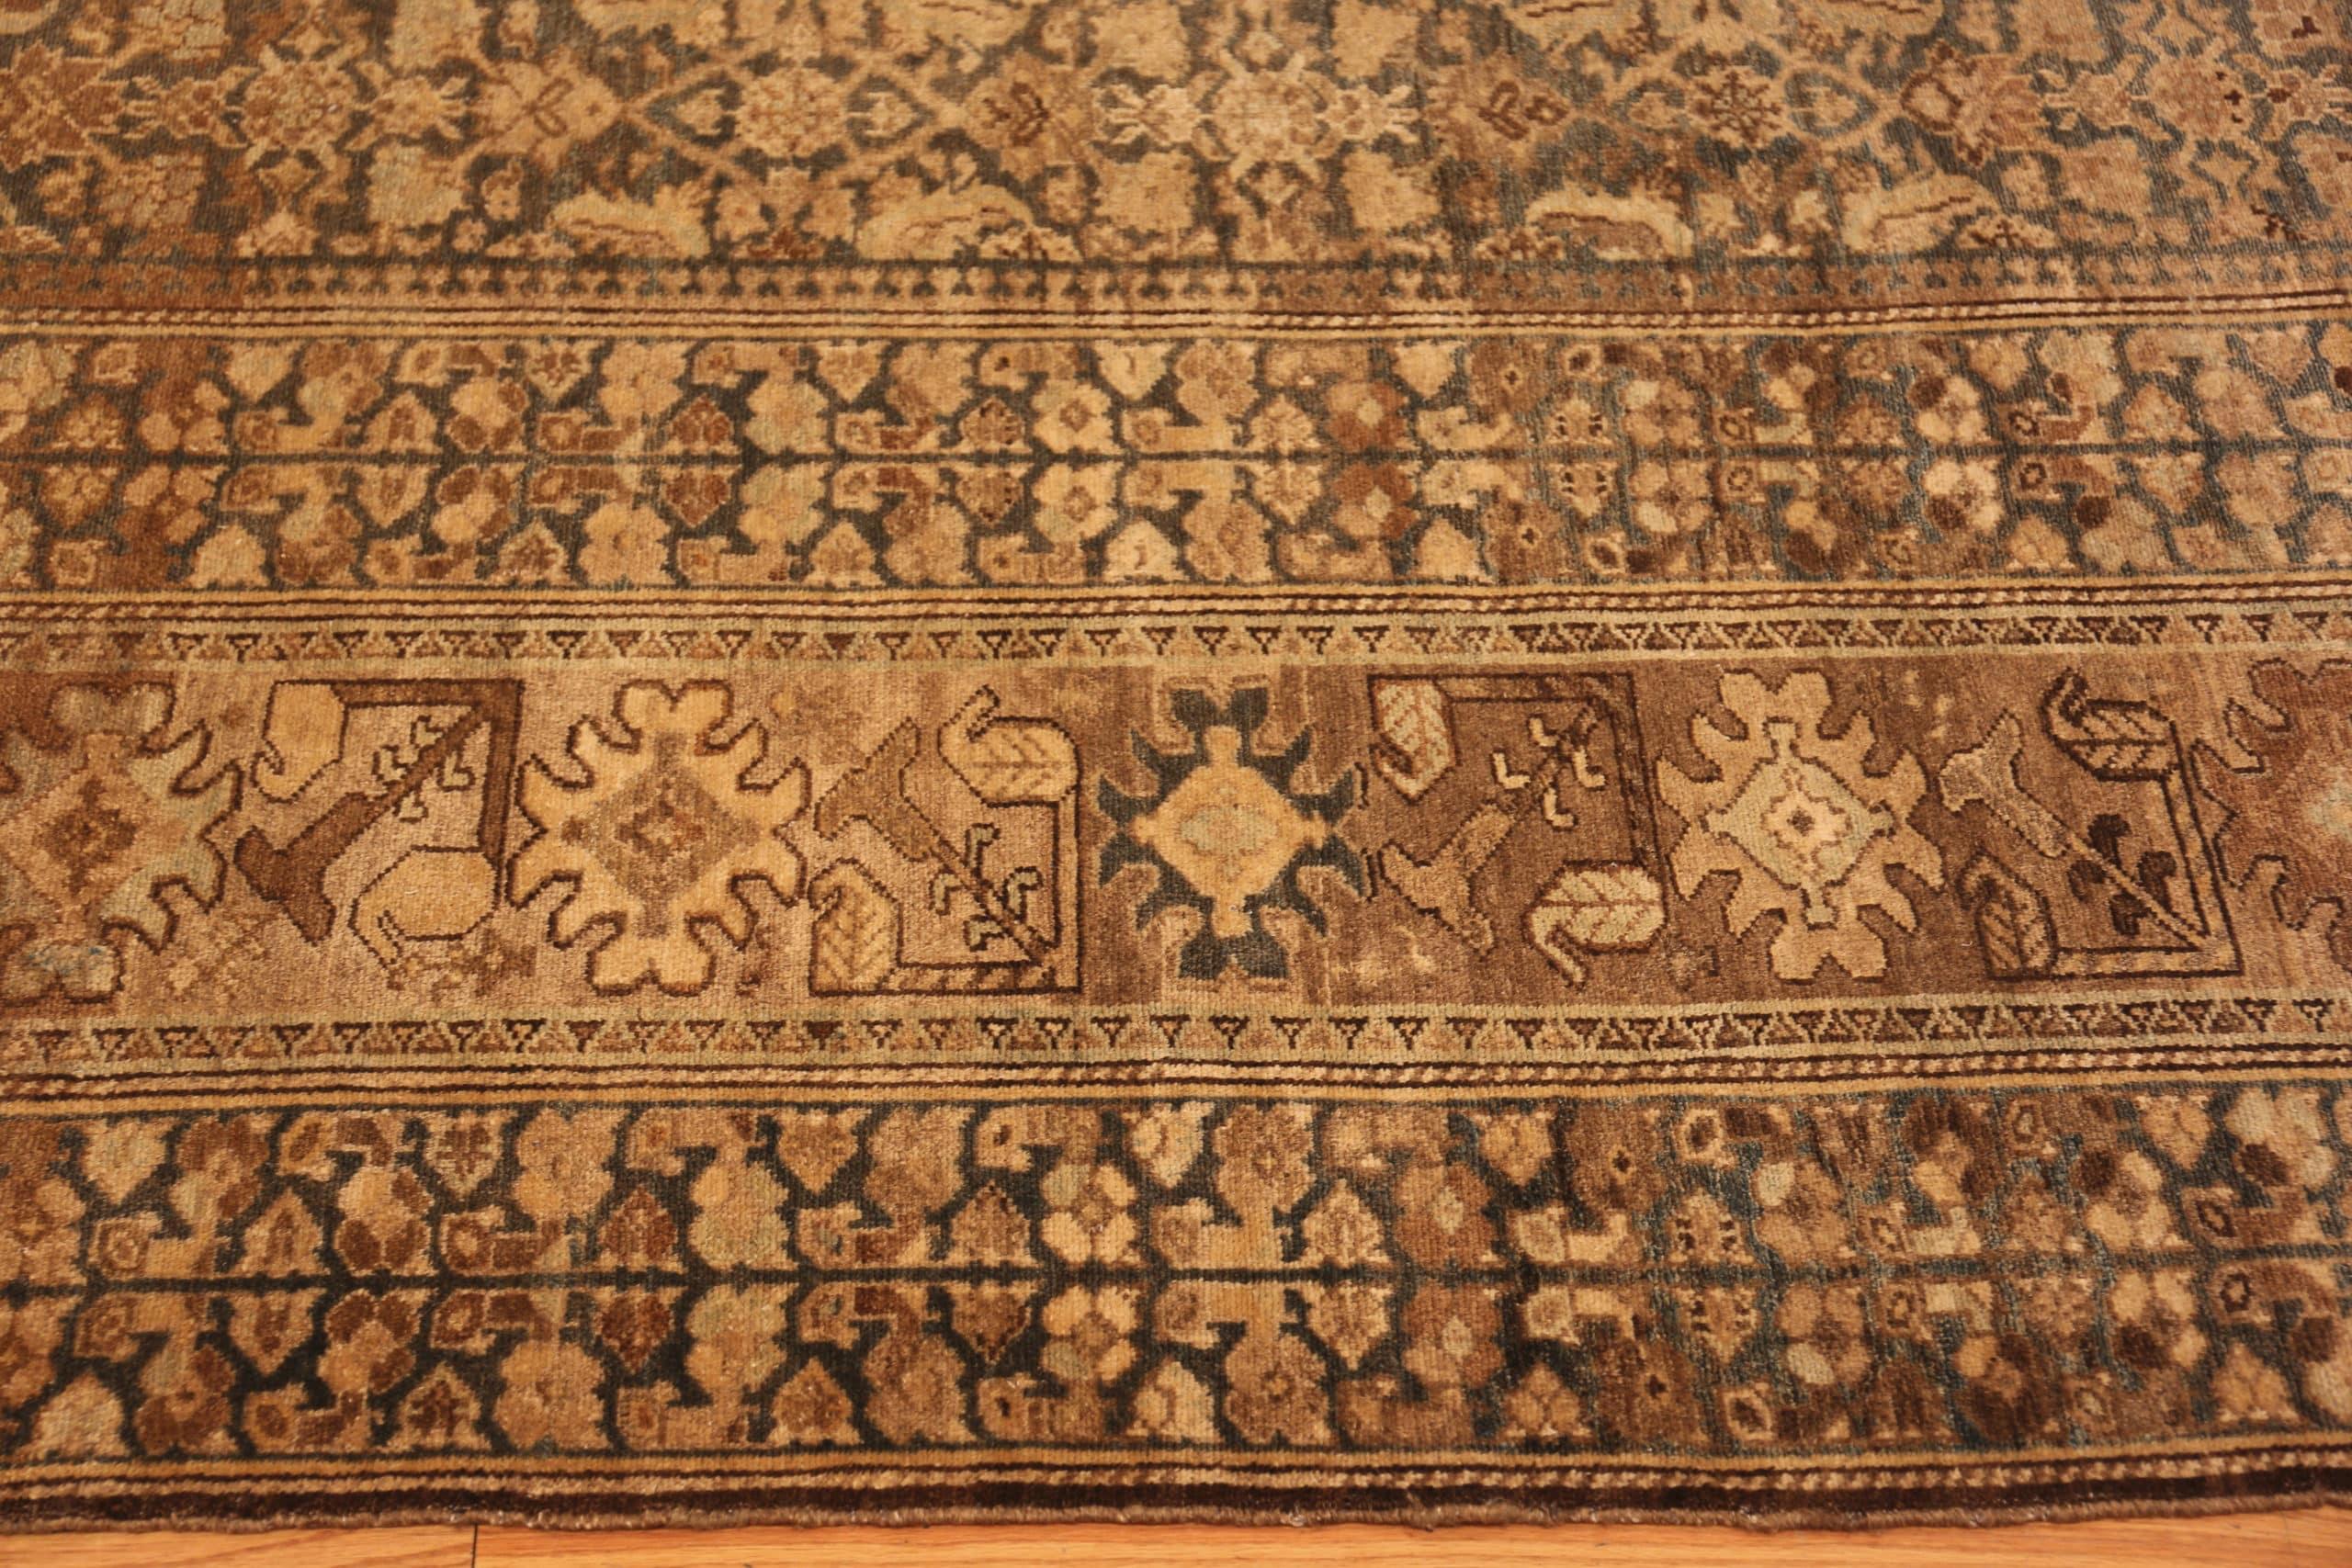 Oversized Antique Persian Malayer Rug, country of origin: Persia, circa 1920. Size: 10 ft 4 in x 22 ft 2 in (3.15 m x 6.76 m)